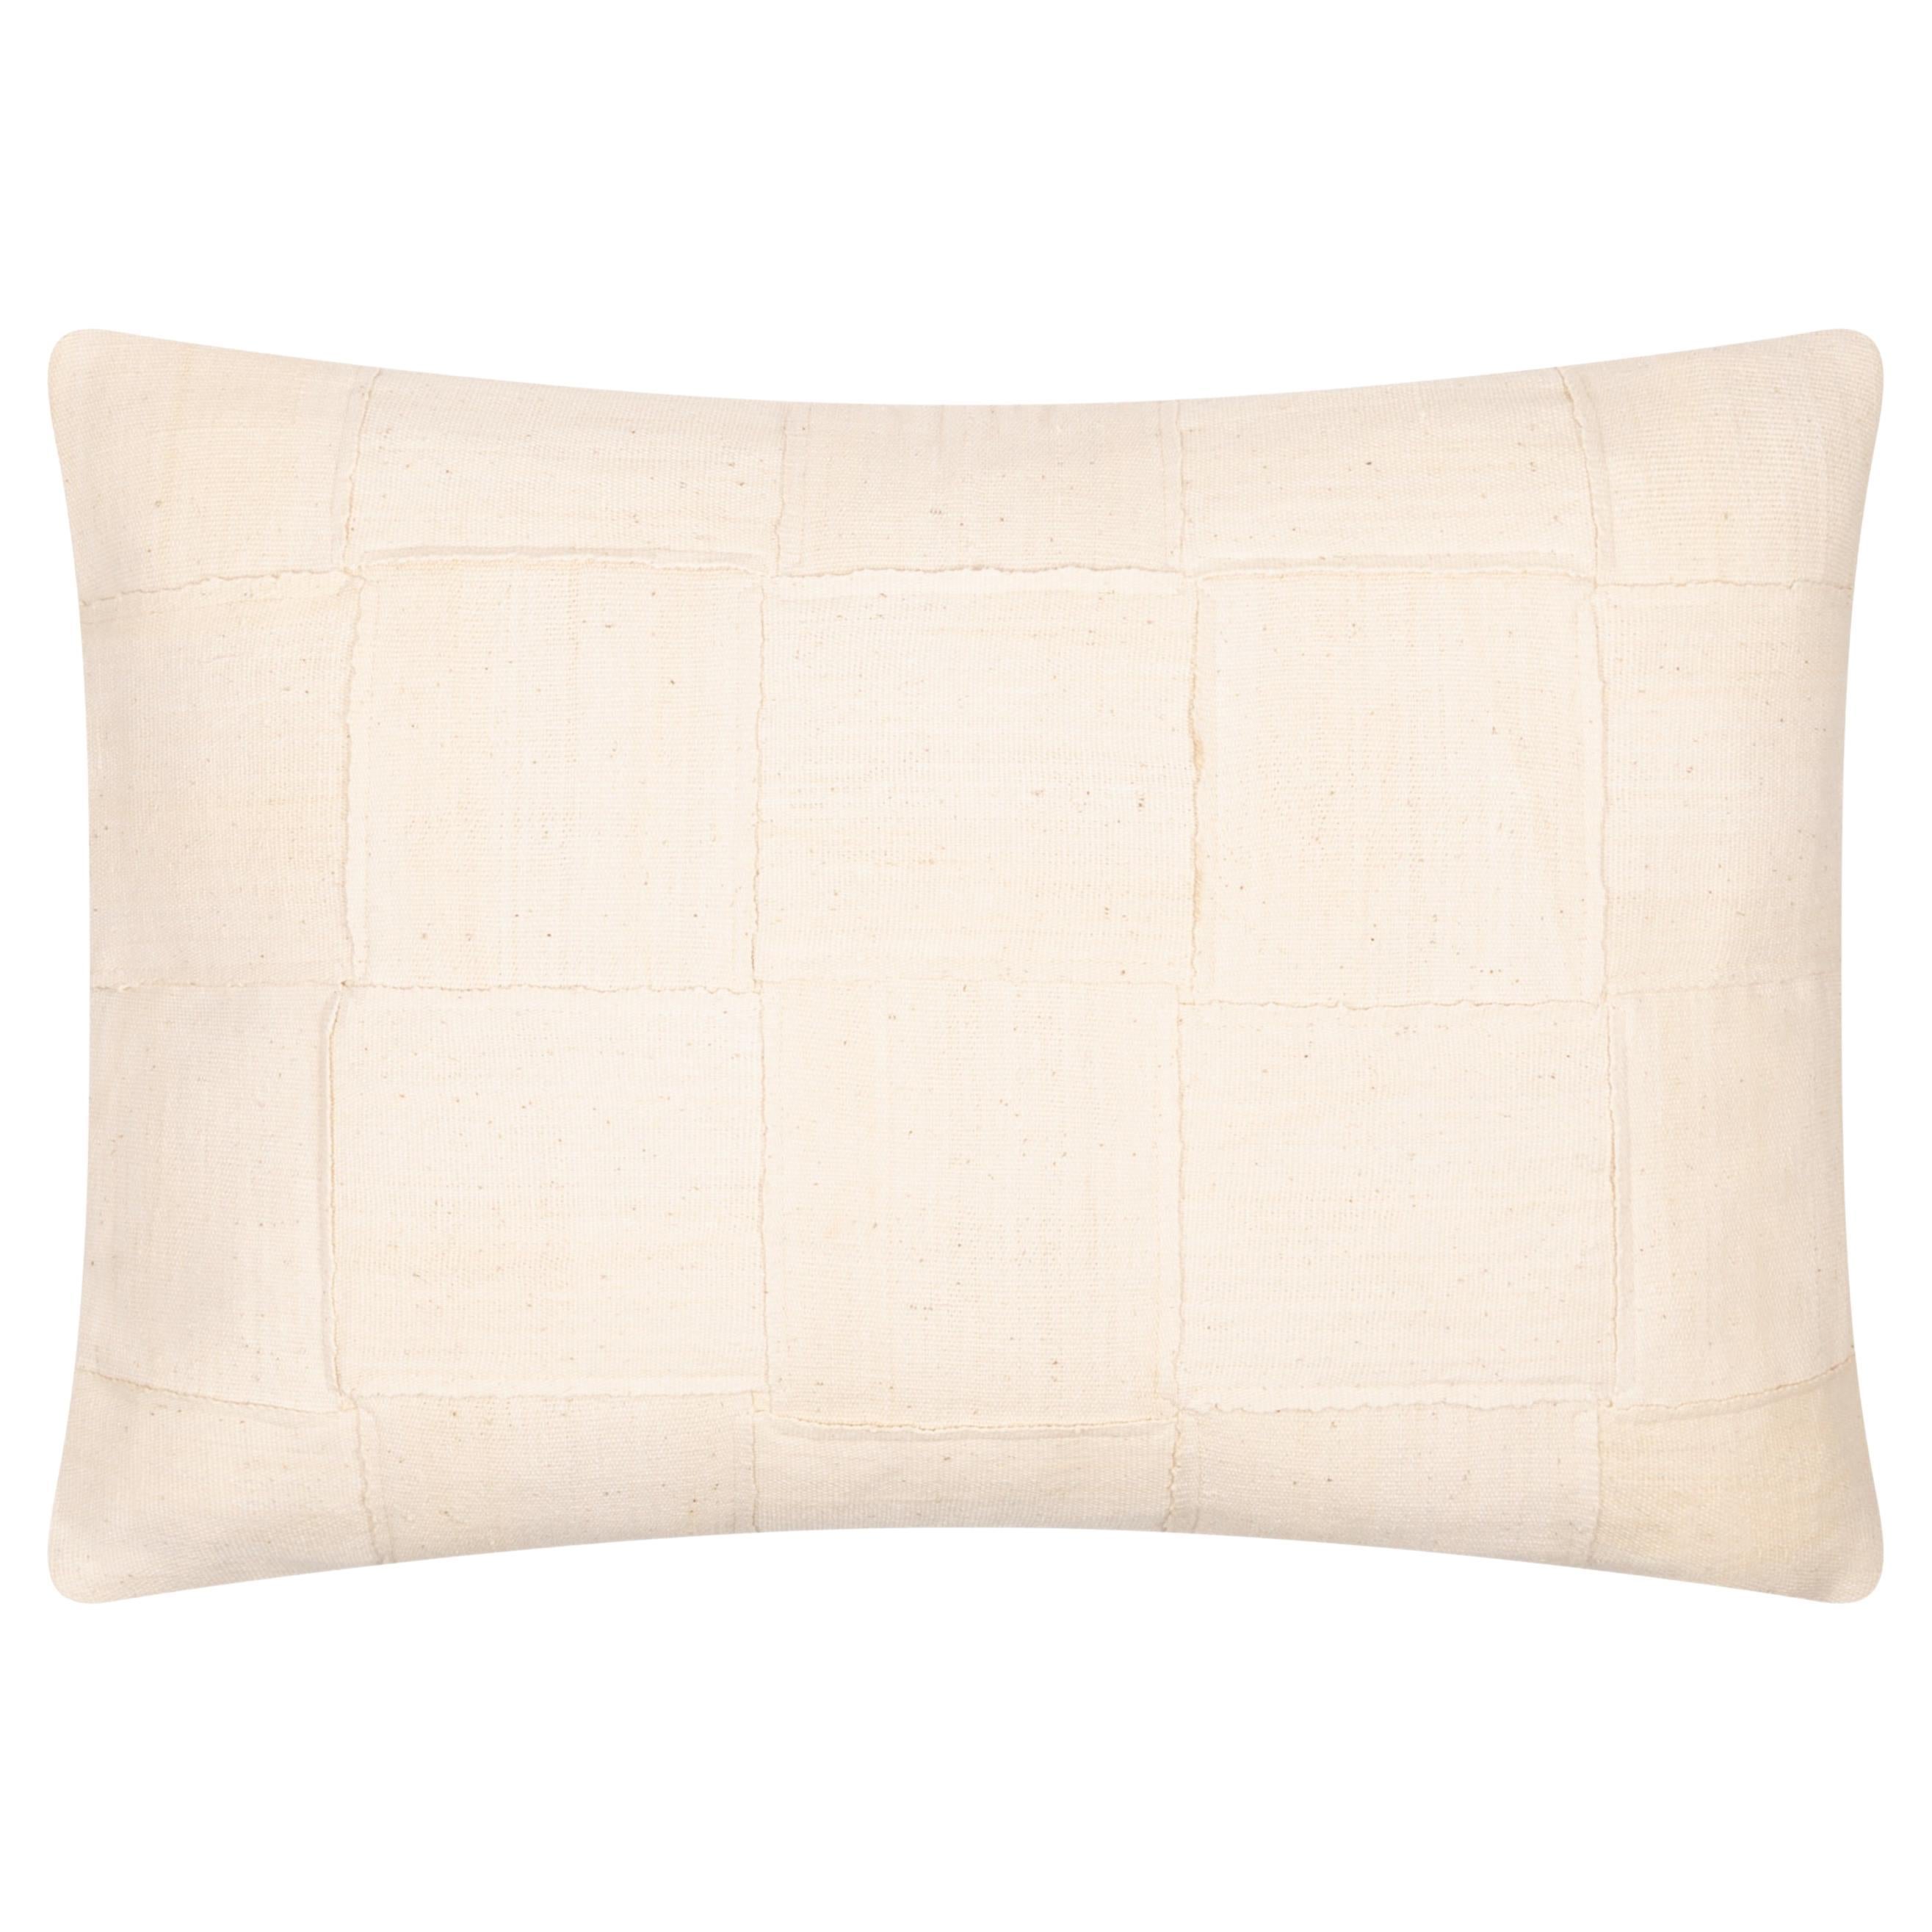 Organic Modern Contemporary White Handwoven Cushion Cover For Sale